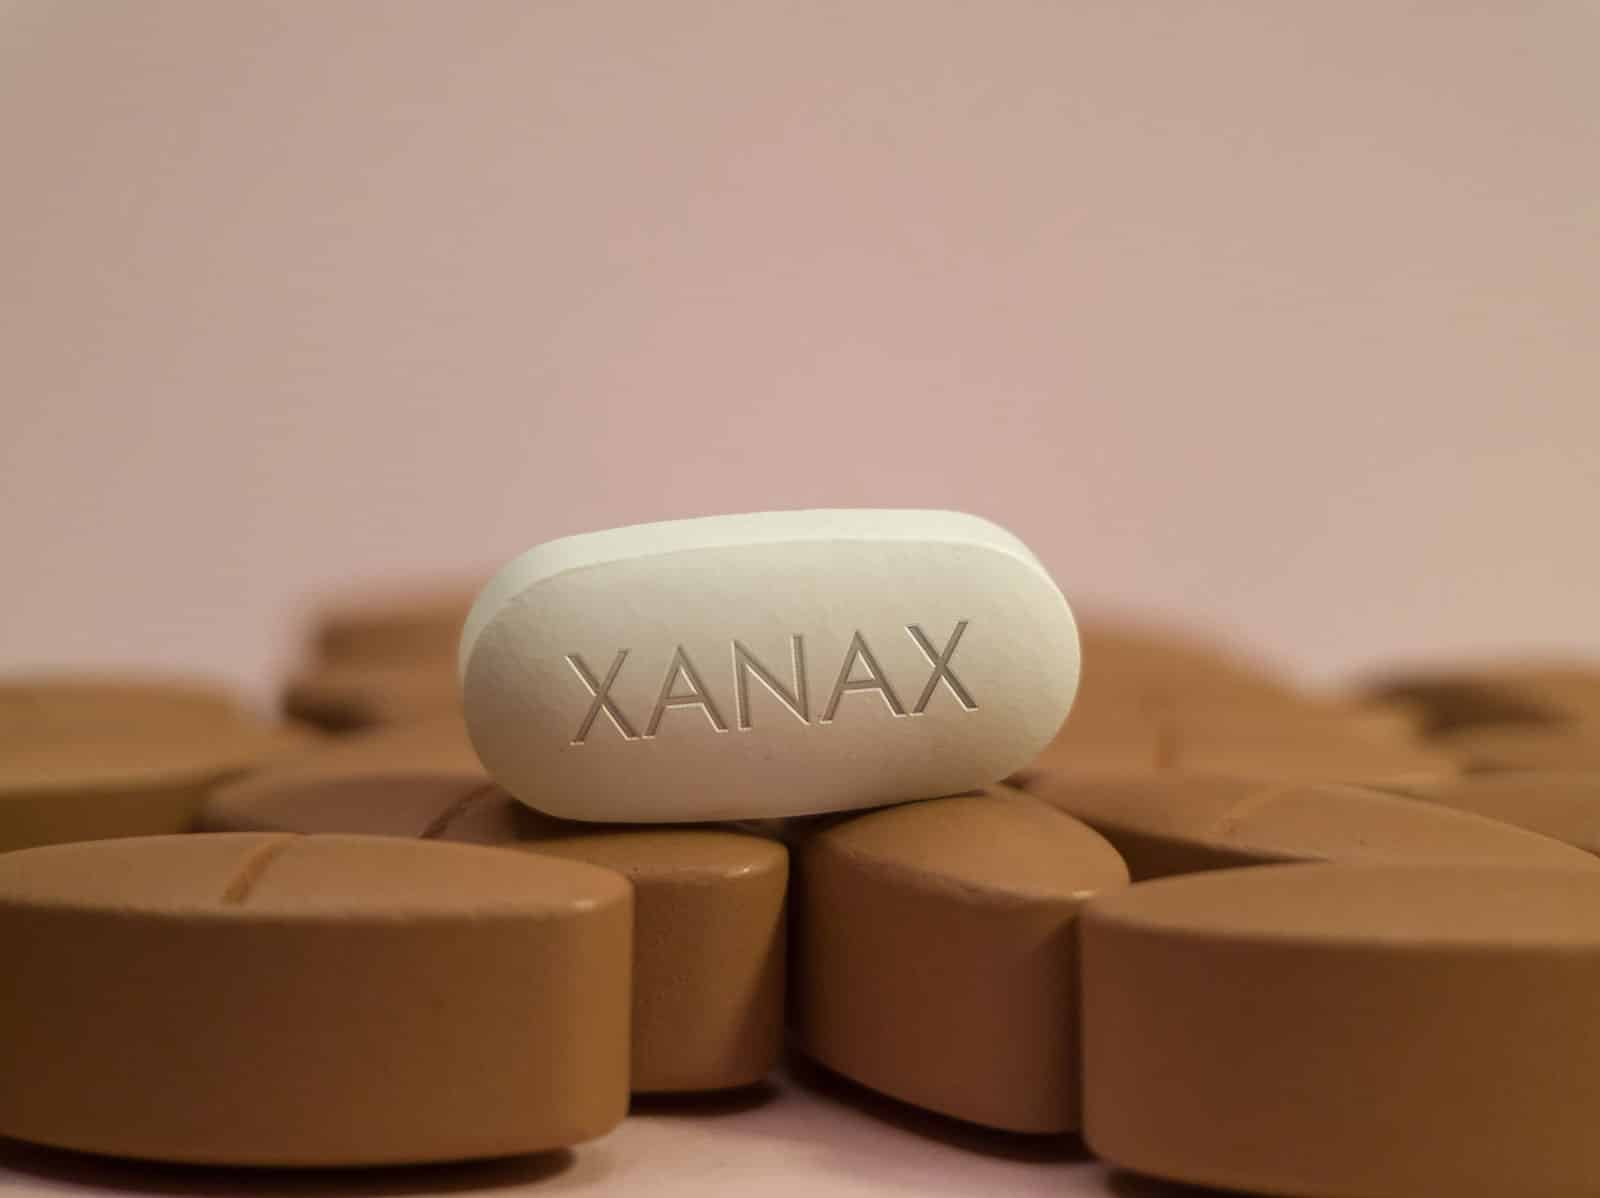 Halcion vs Xanax: What’s the Difference?